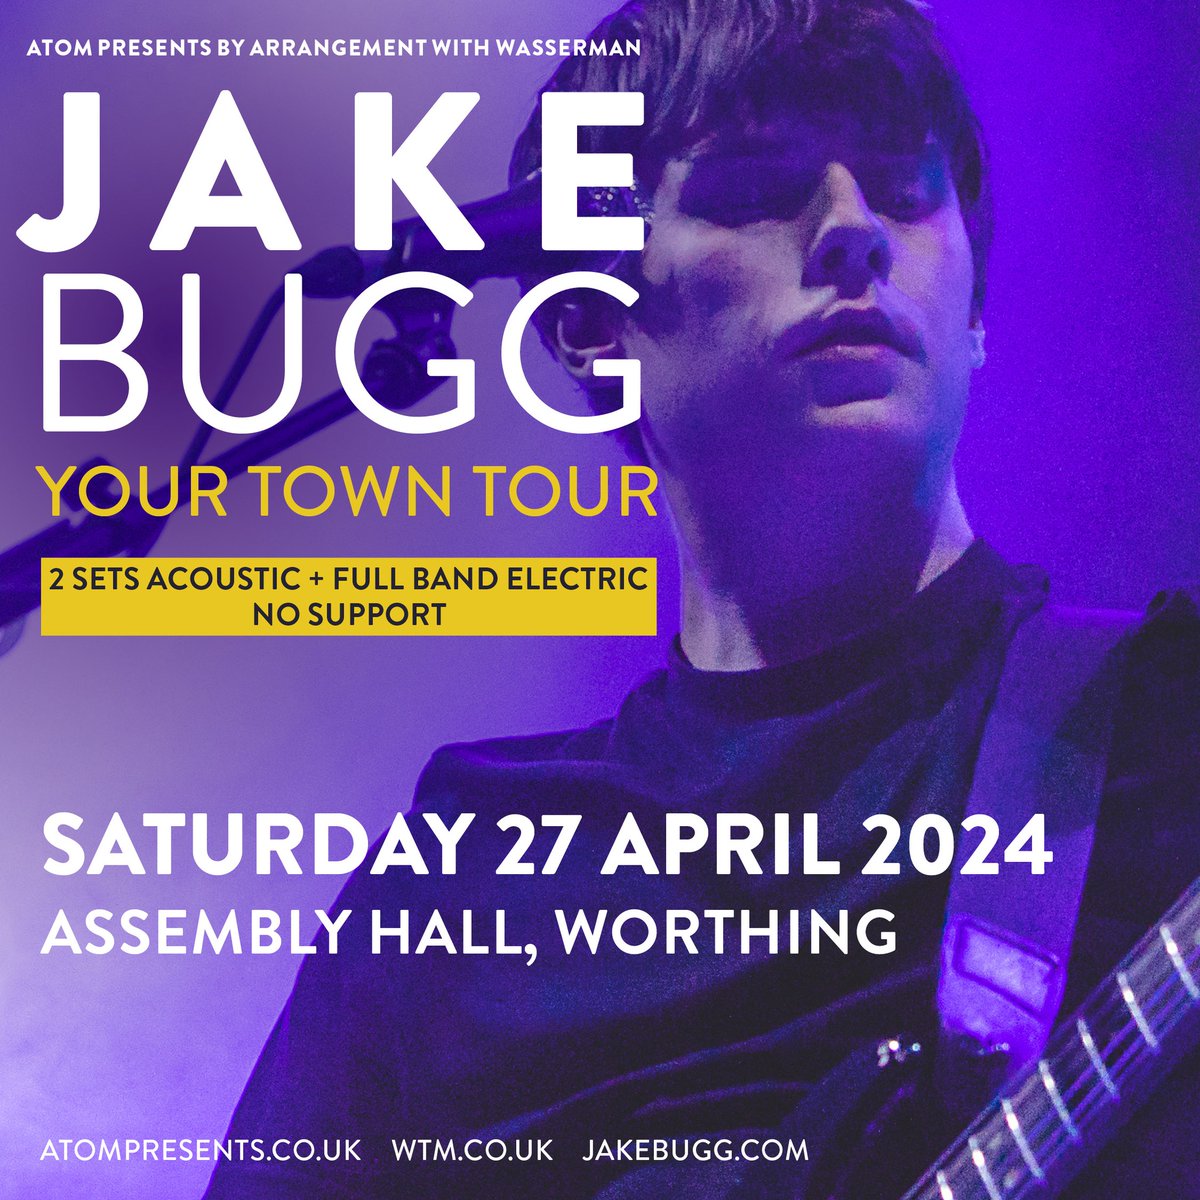 6x production holds just released for @Jakebugg Tonight at @wtmworthing - tickets will be available on the door from 7pm, go go go!

#Gig #LiveMusic #Worthing #JakeBugg #Tonight